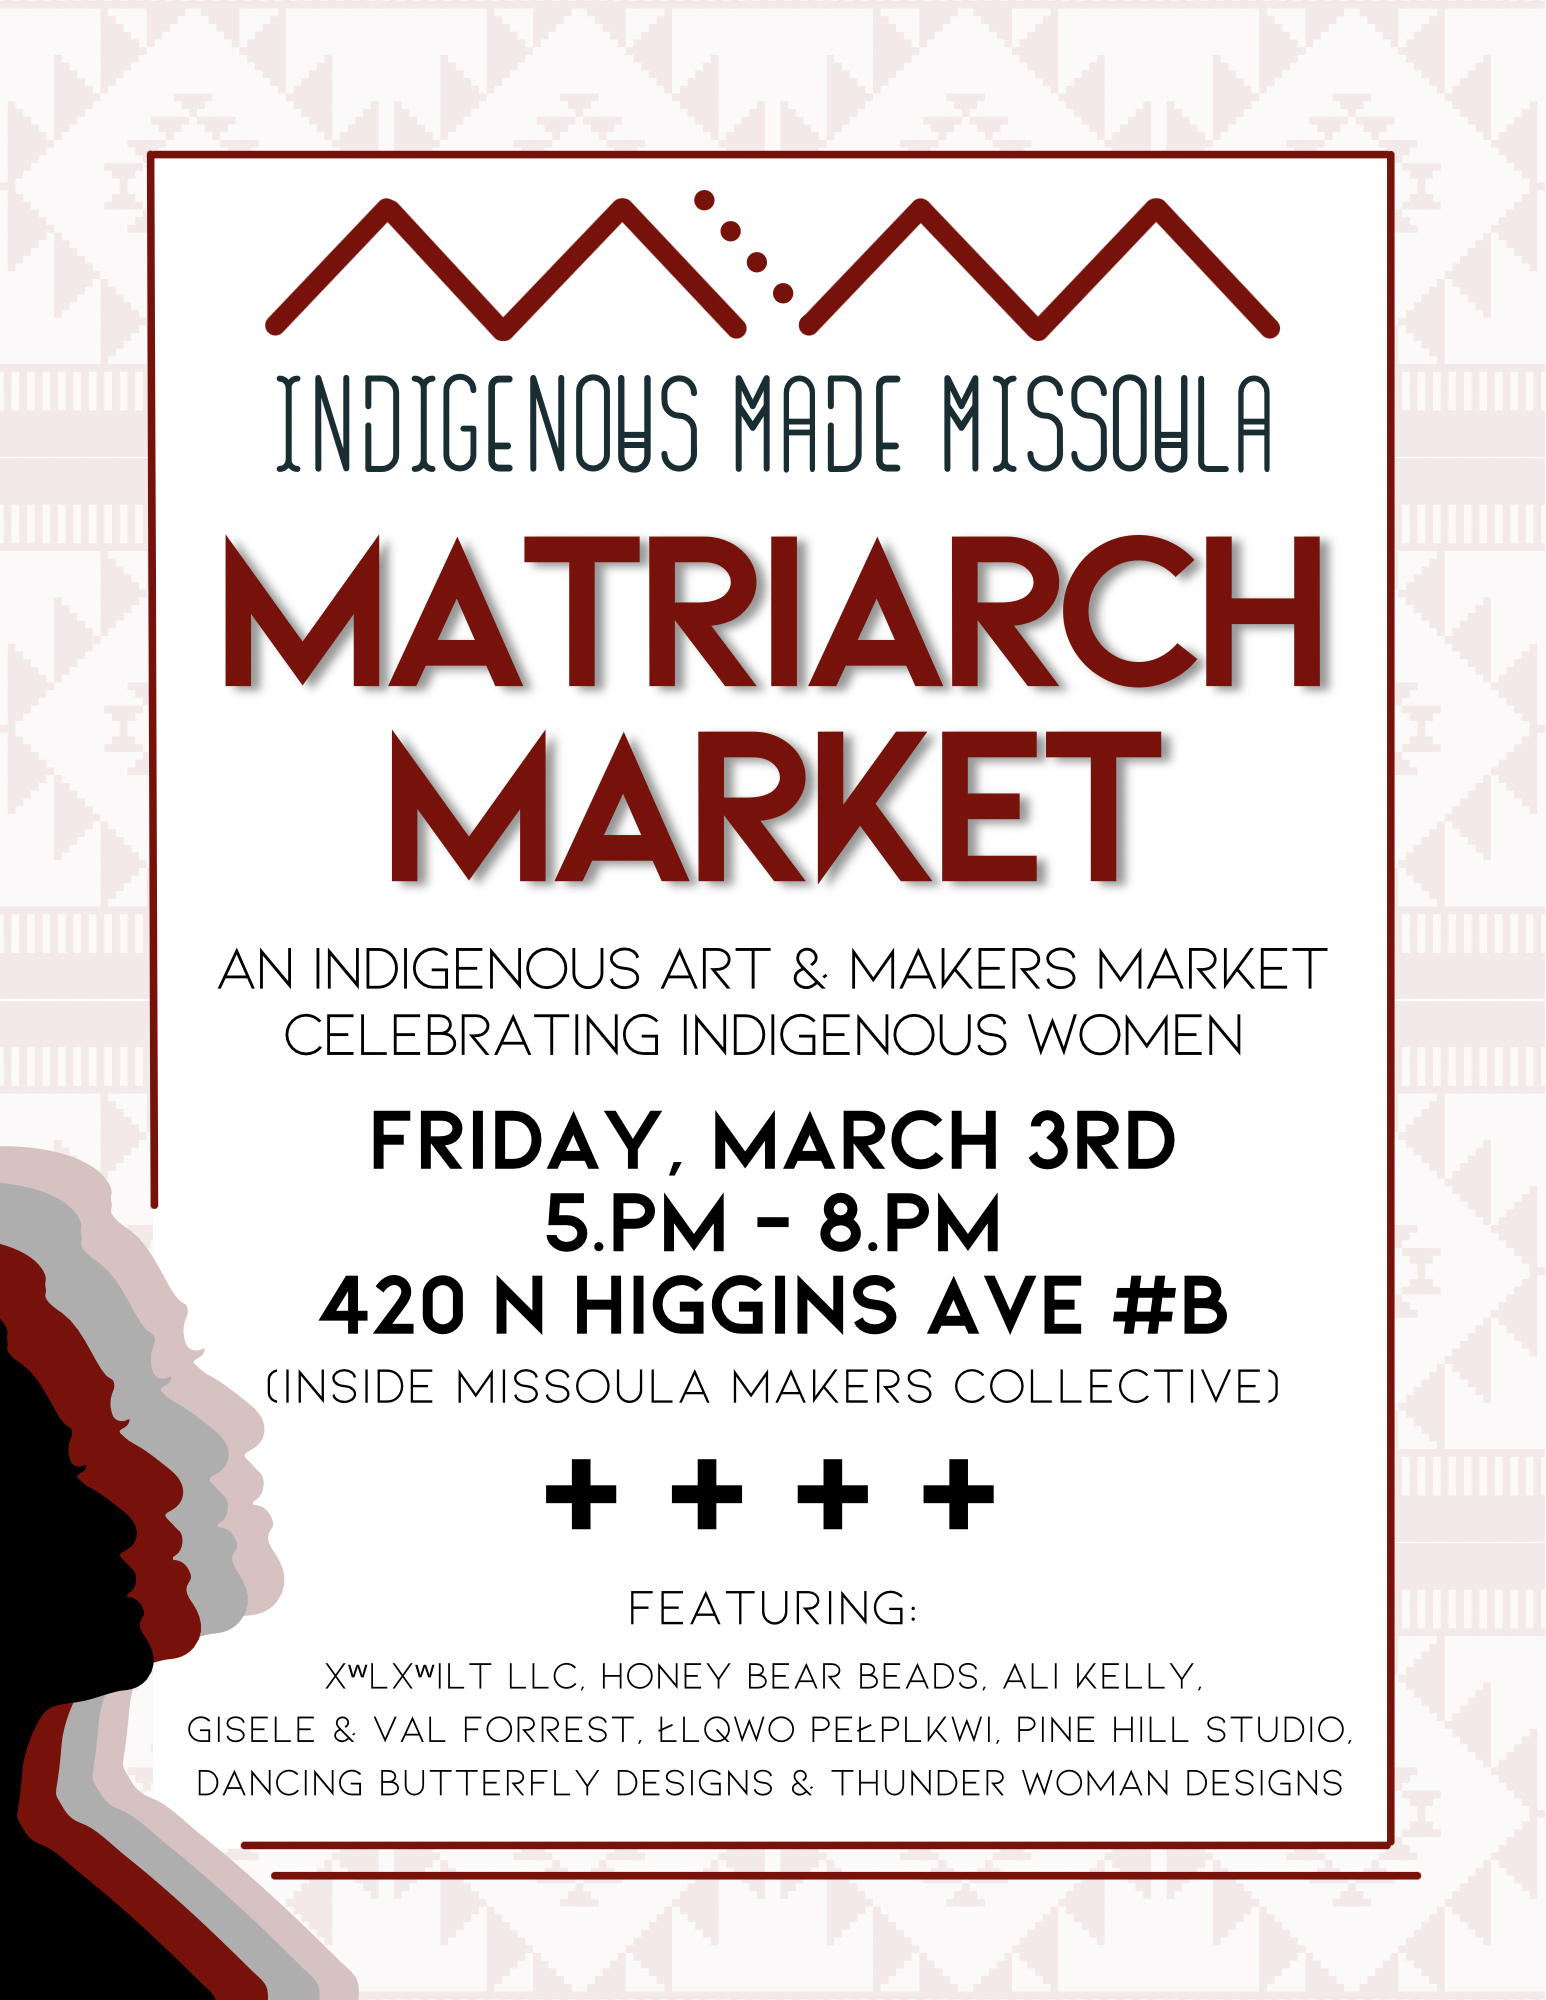 Indigenous Made Missoula Matriarch Market at Missoula Makers Collective on Friday, March 3 from 5:00 pm to 8:00 pm